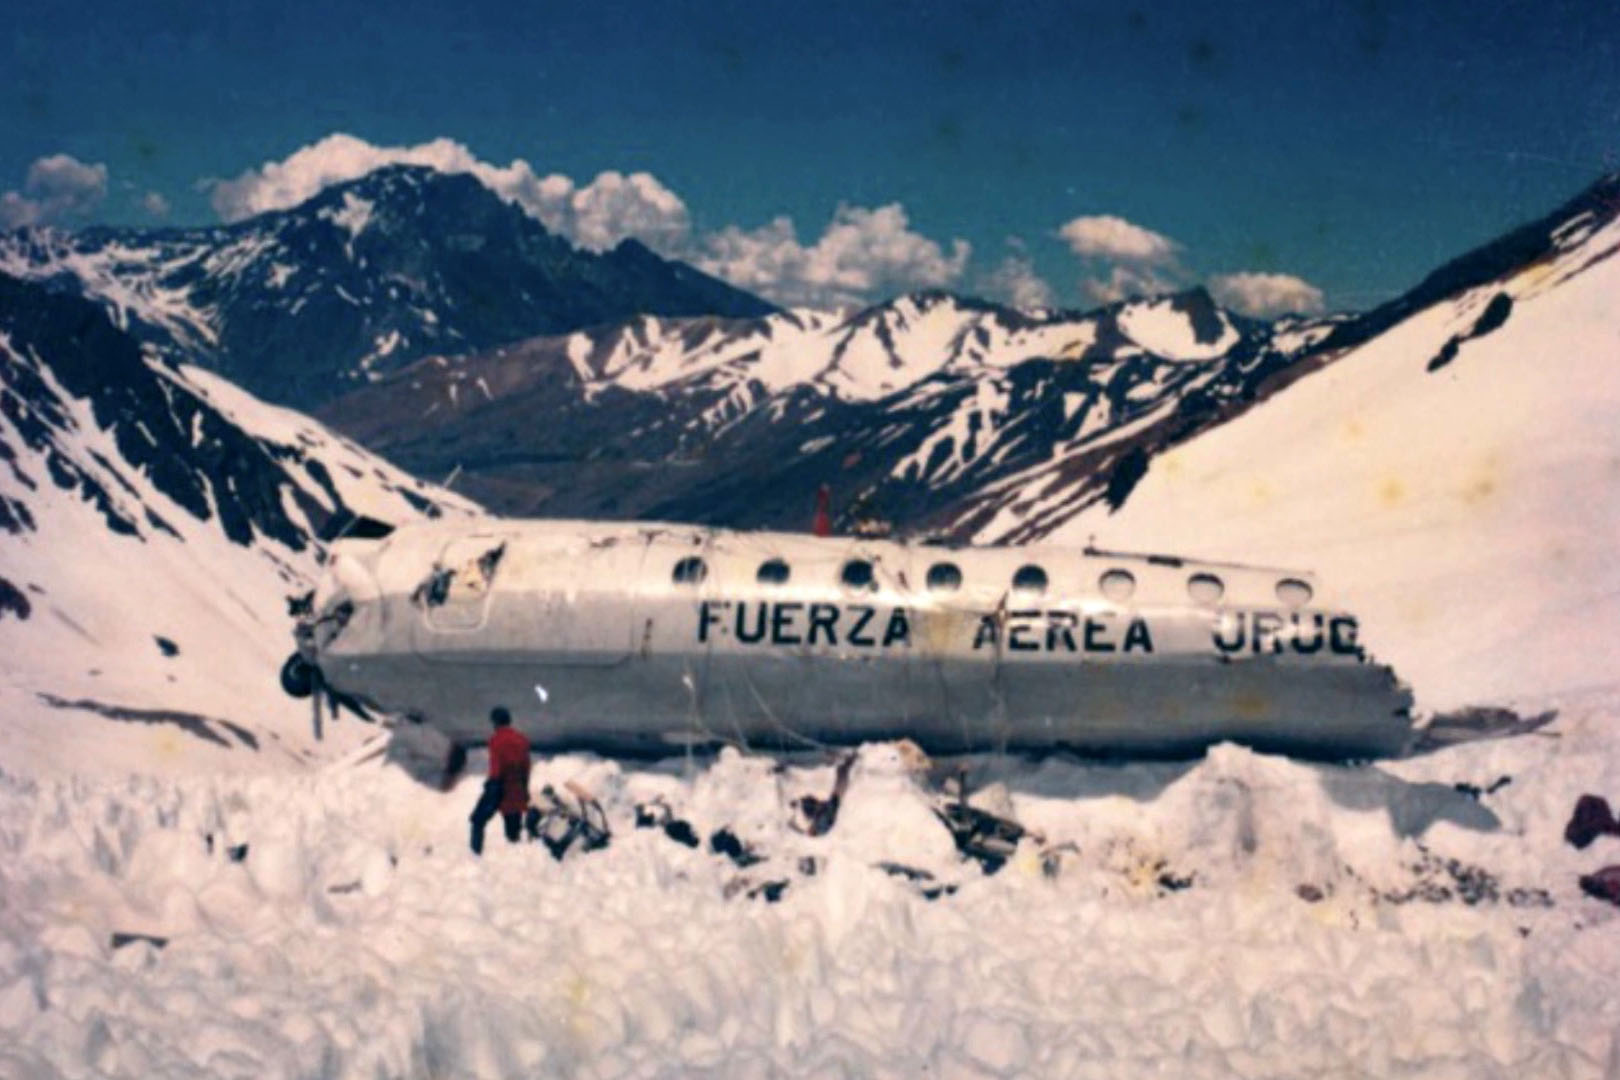 Roberto Canessa relives a plane crash in the Andes 45 years ago